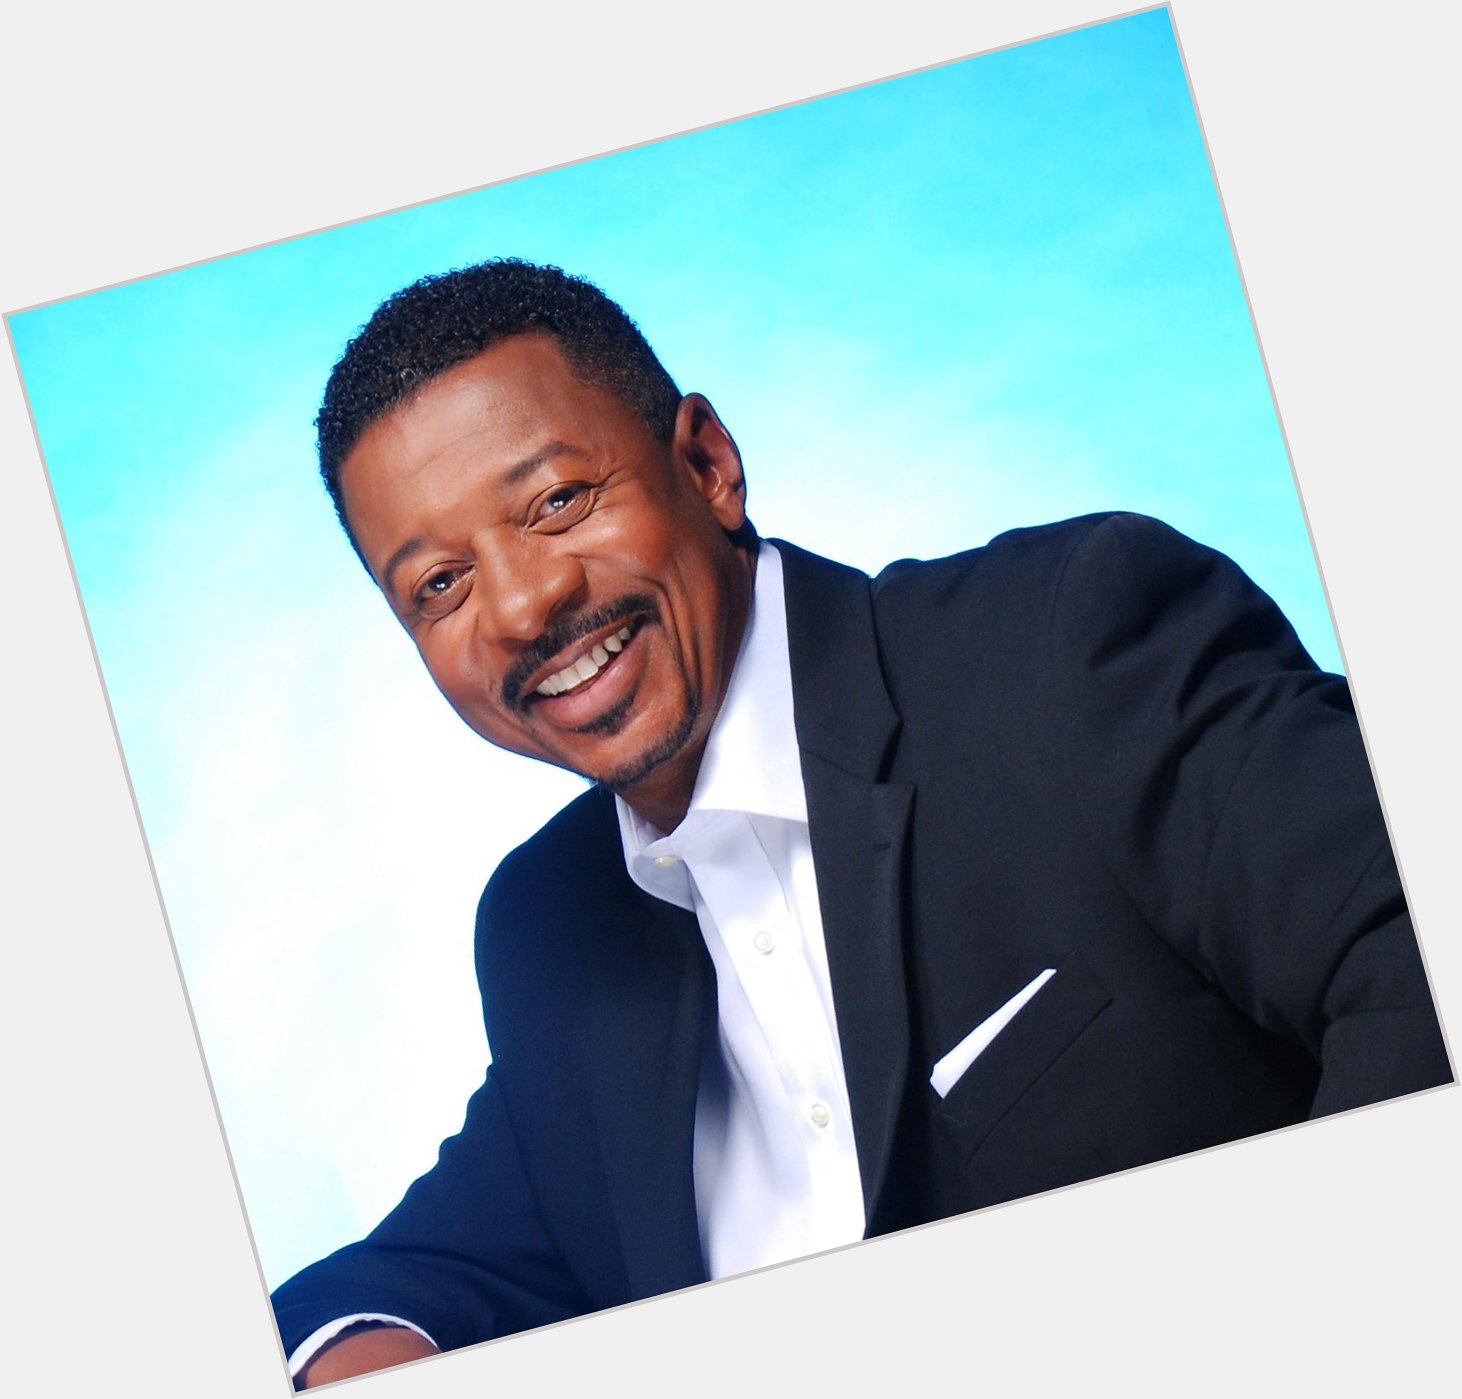 Happy Birthday to Robert Townsend, who turns 58 today! 